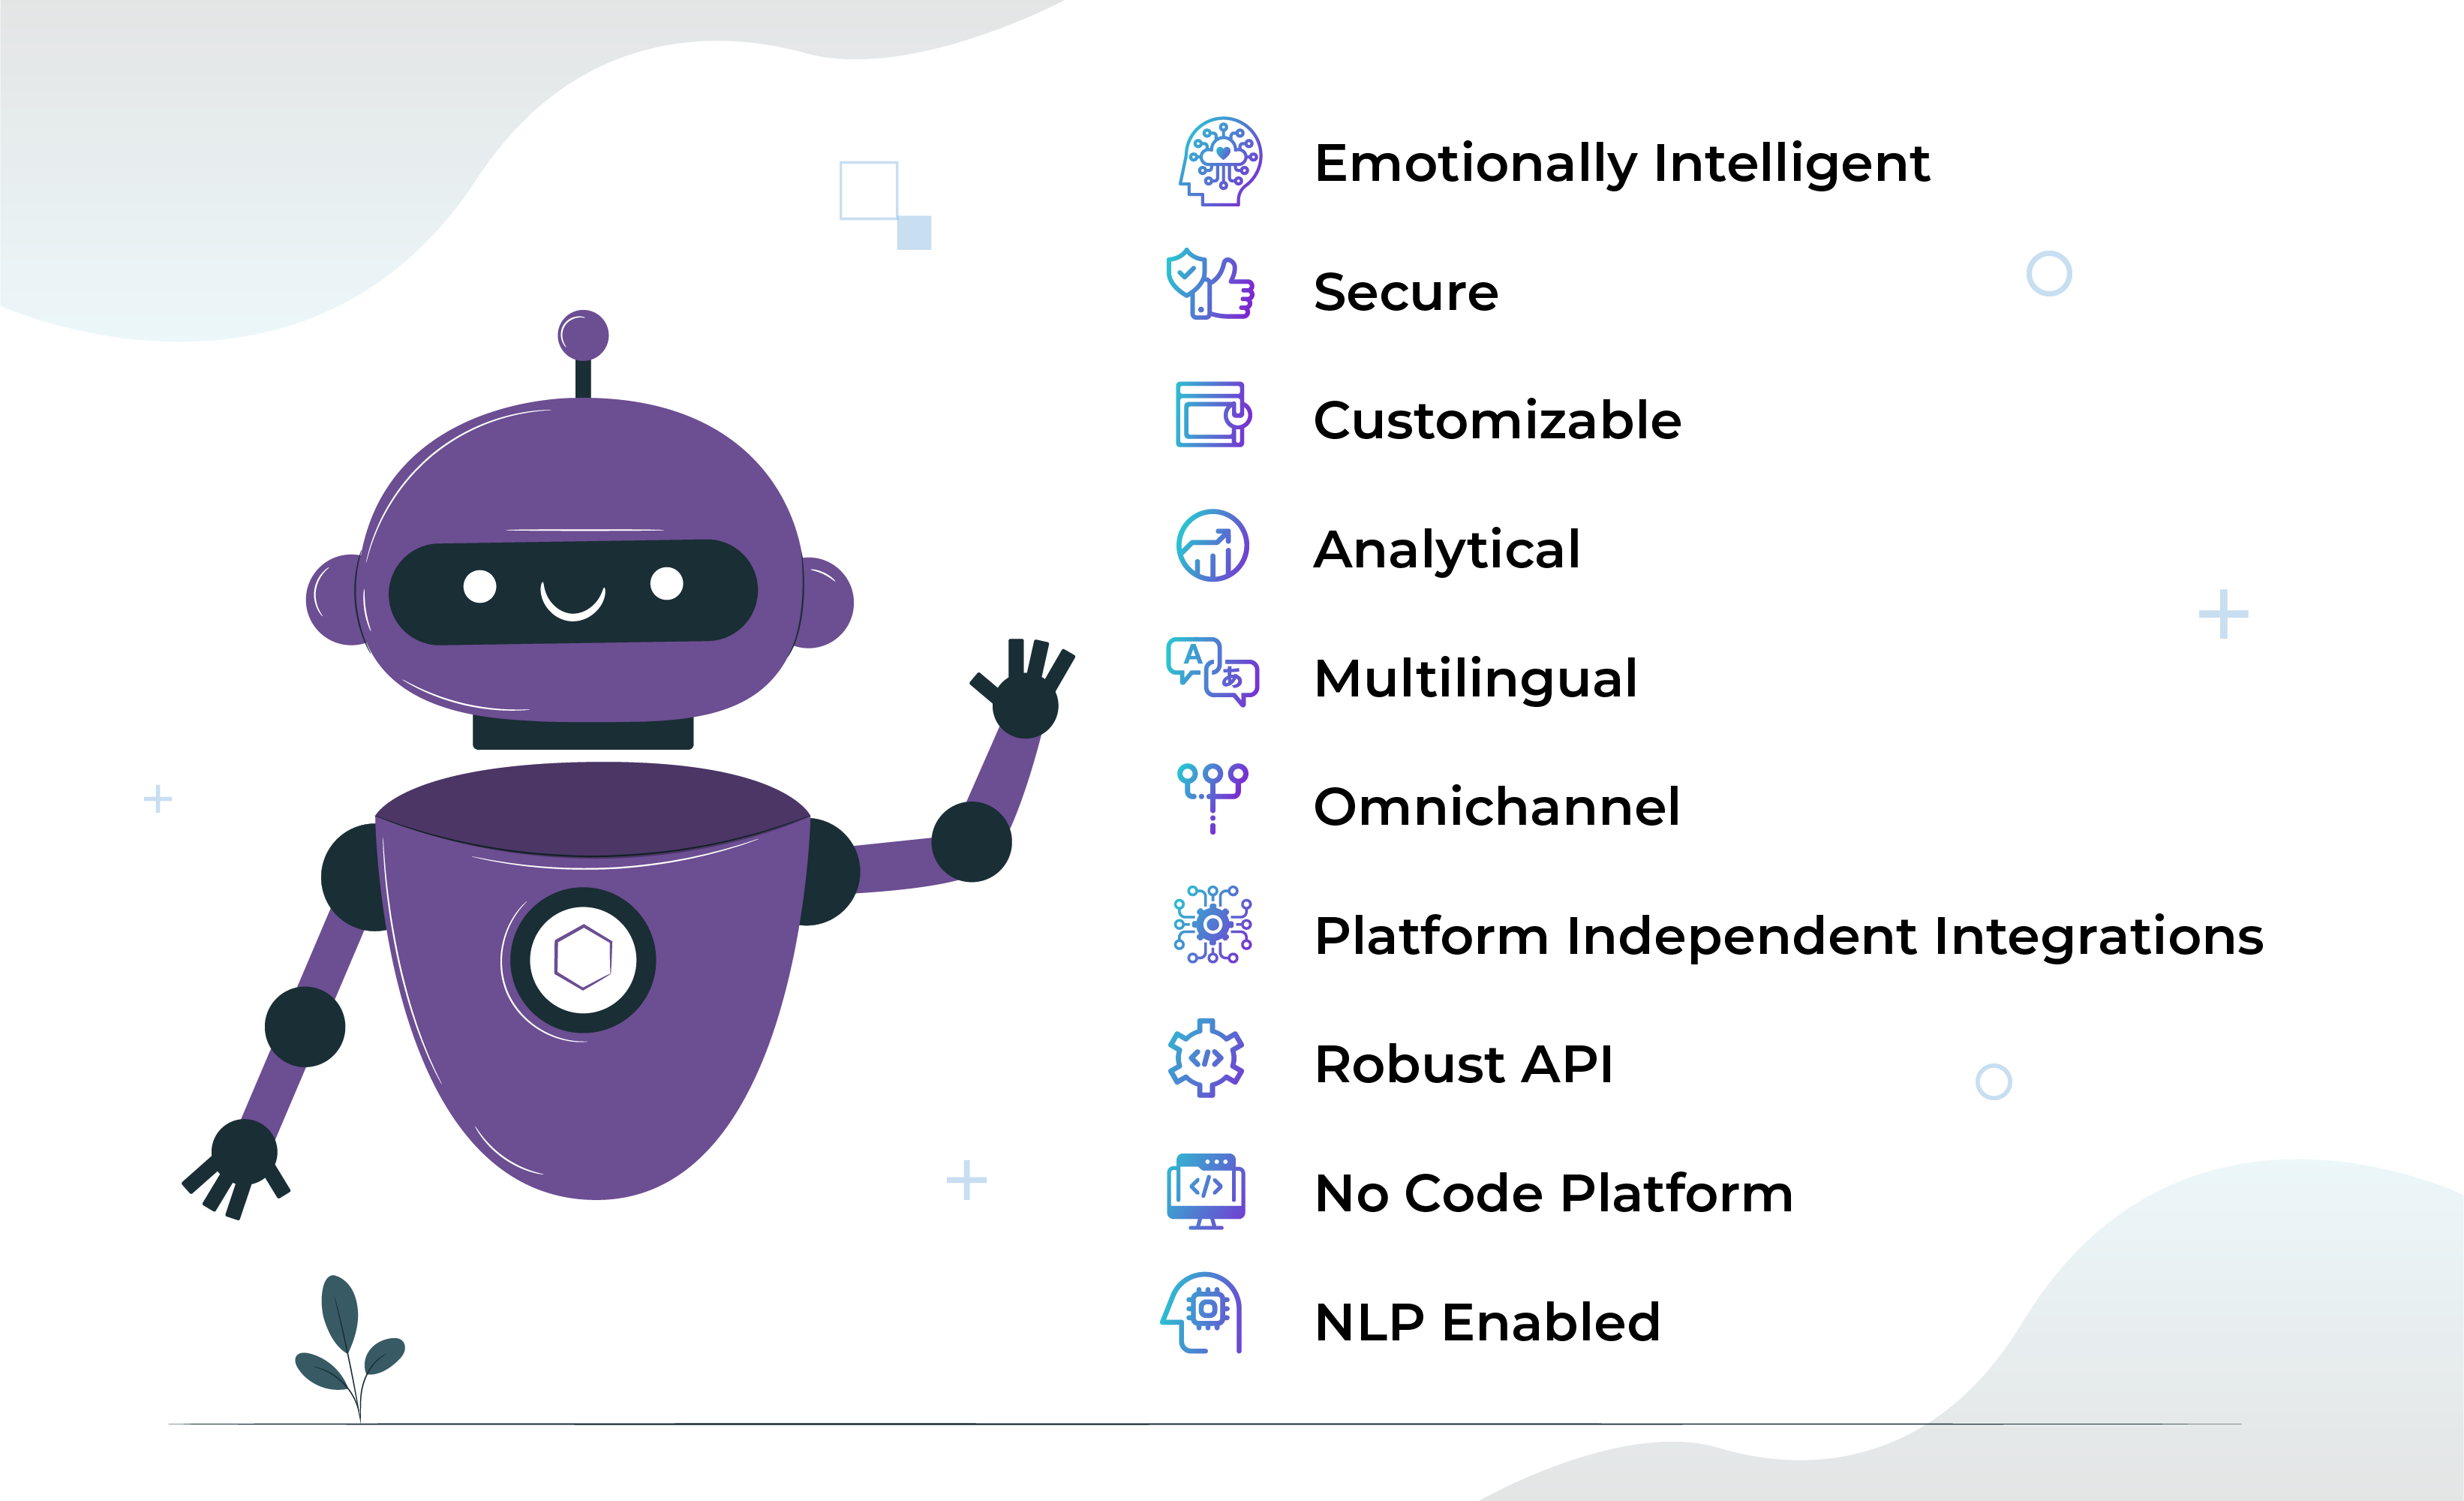 best chatbot use cases